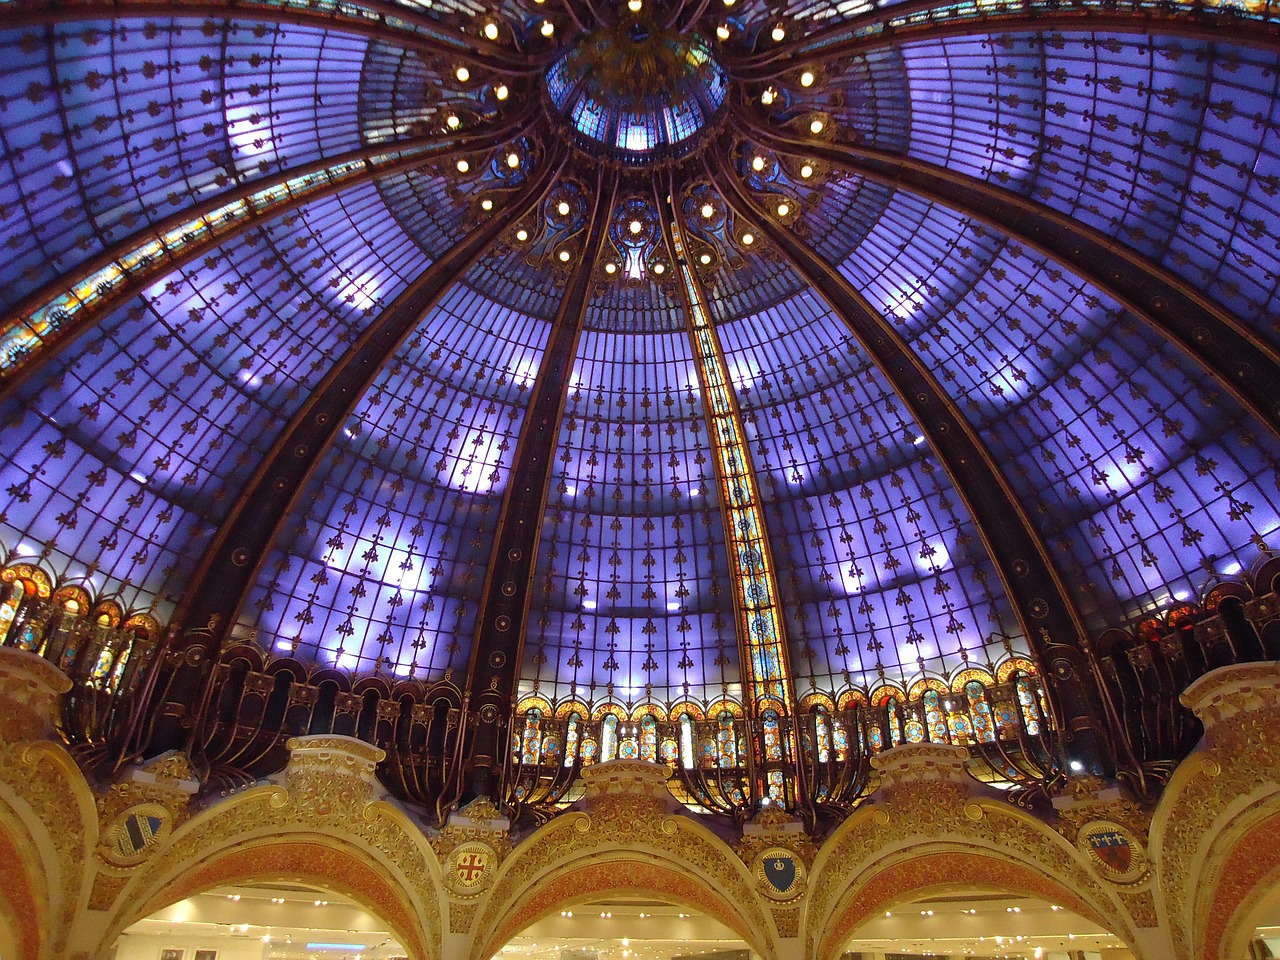 galeries lafayette ceiling stained glass windows free photo